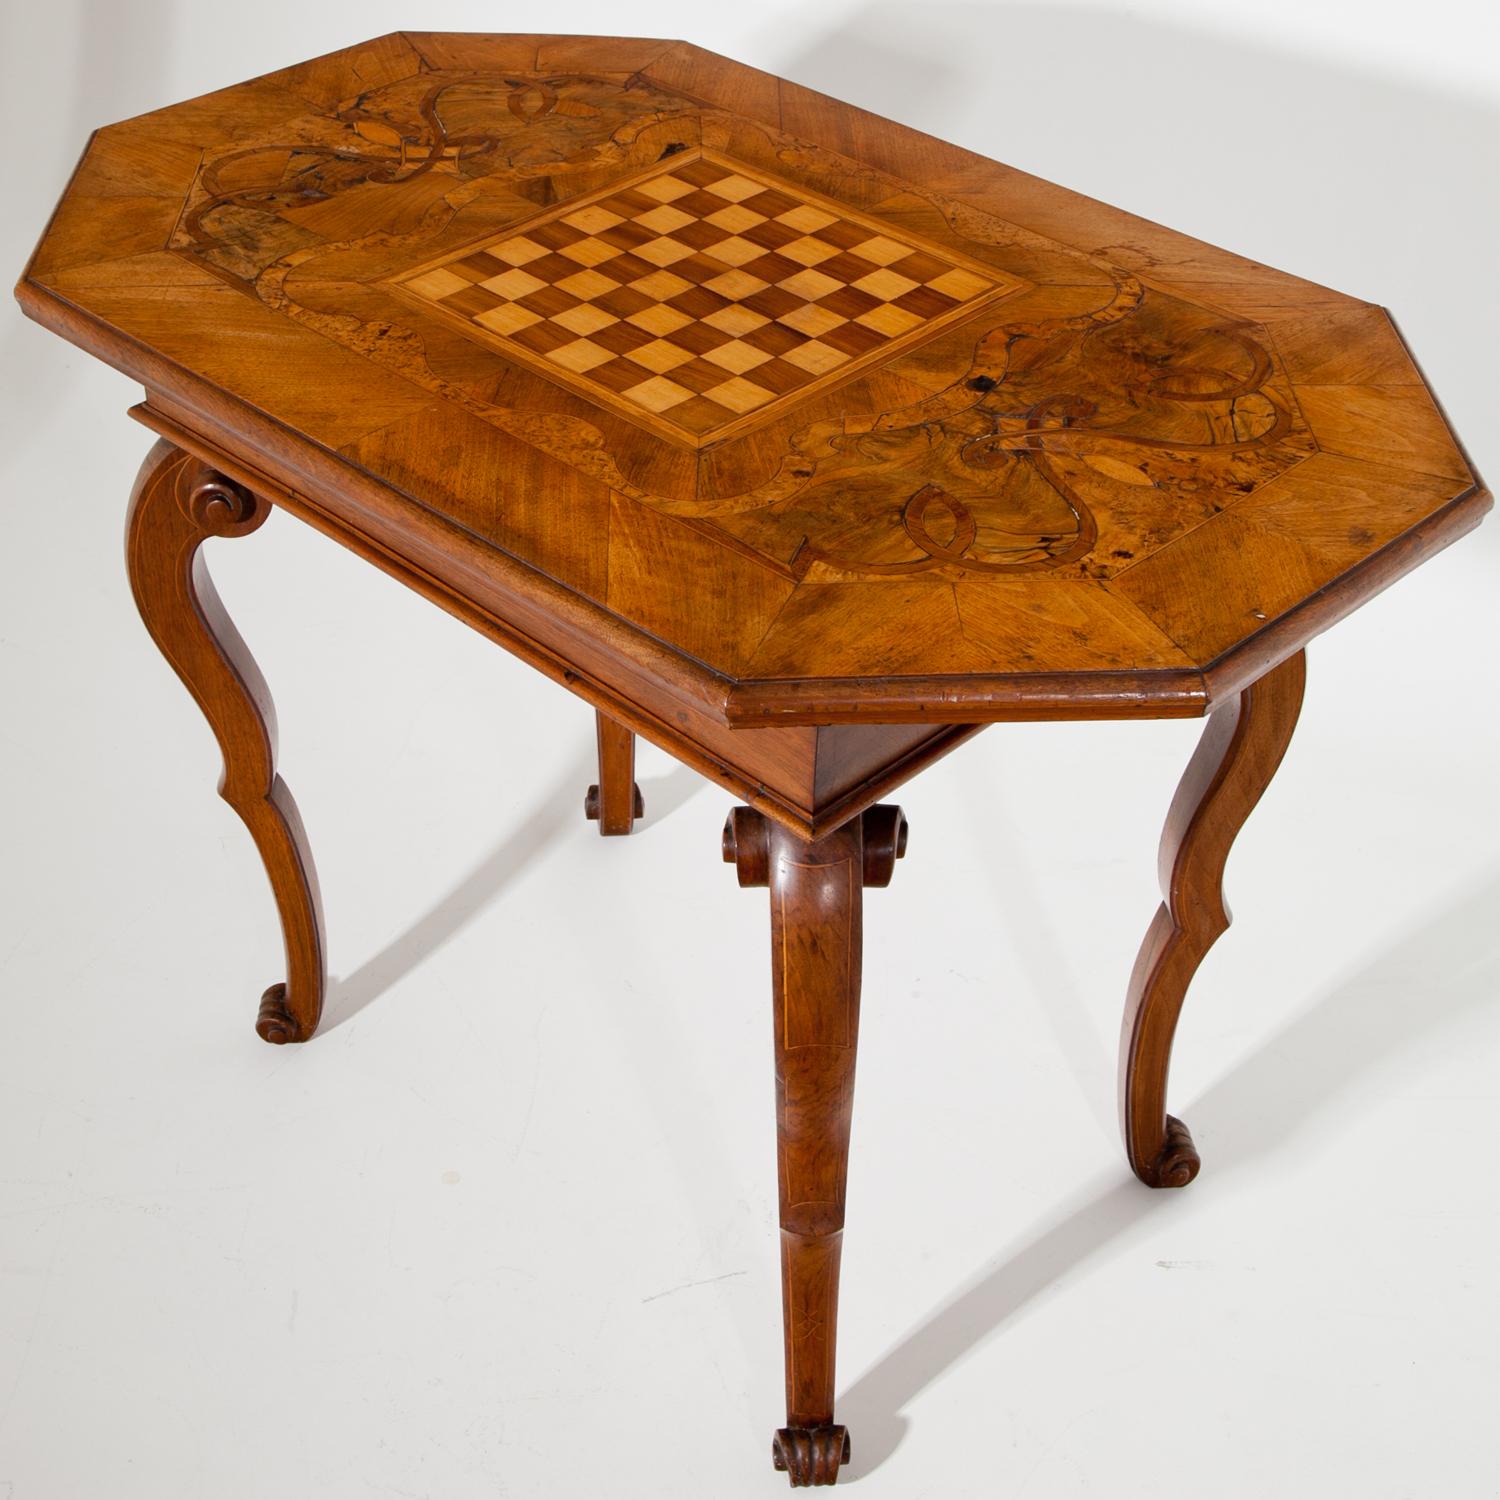 Baroque table standing on voluted legs with thread inlays, made out of walnut. The octagonal tabletop is inlayed with a chessboard surrounded by scrollwork inlays.